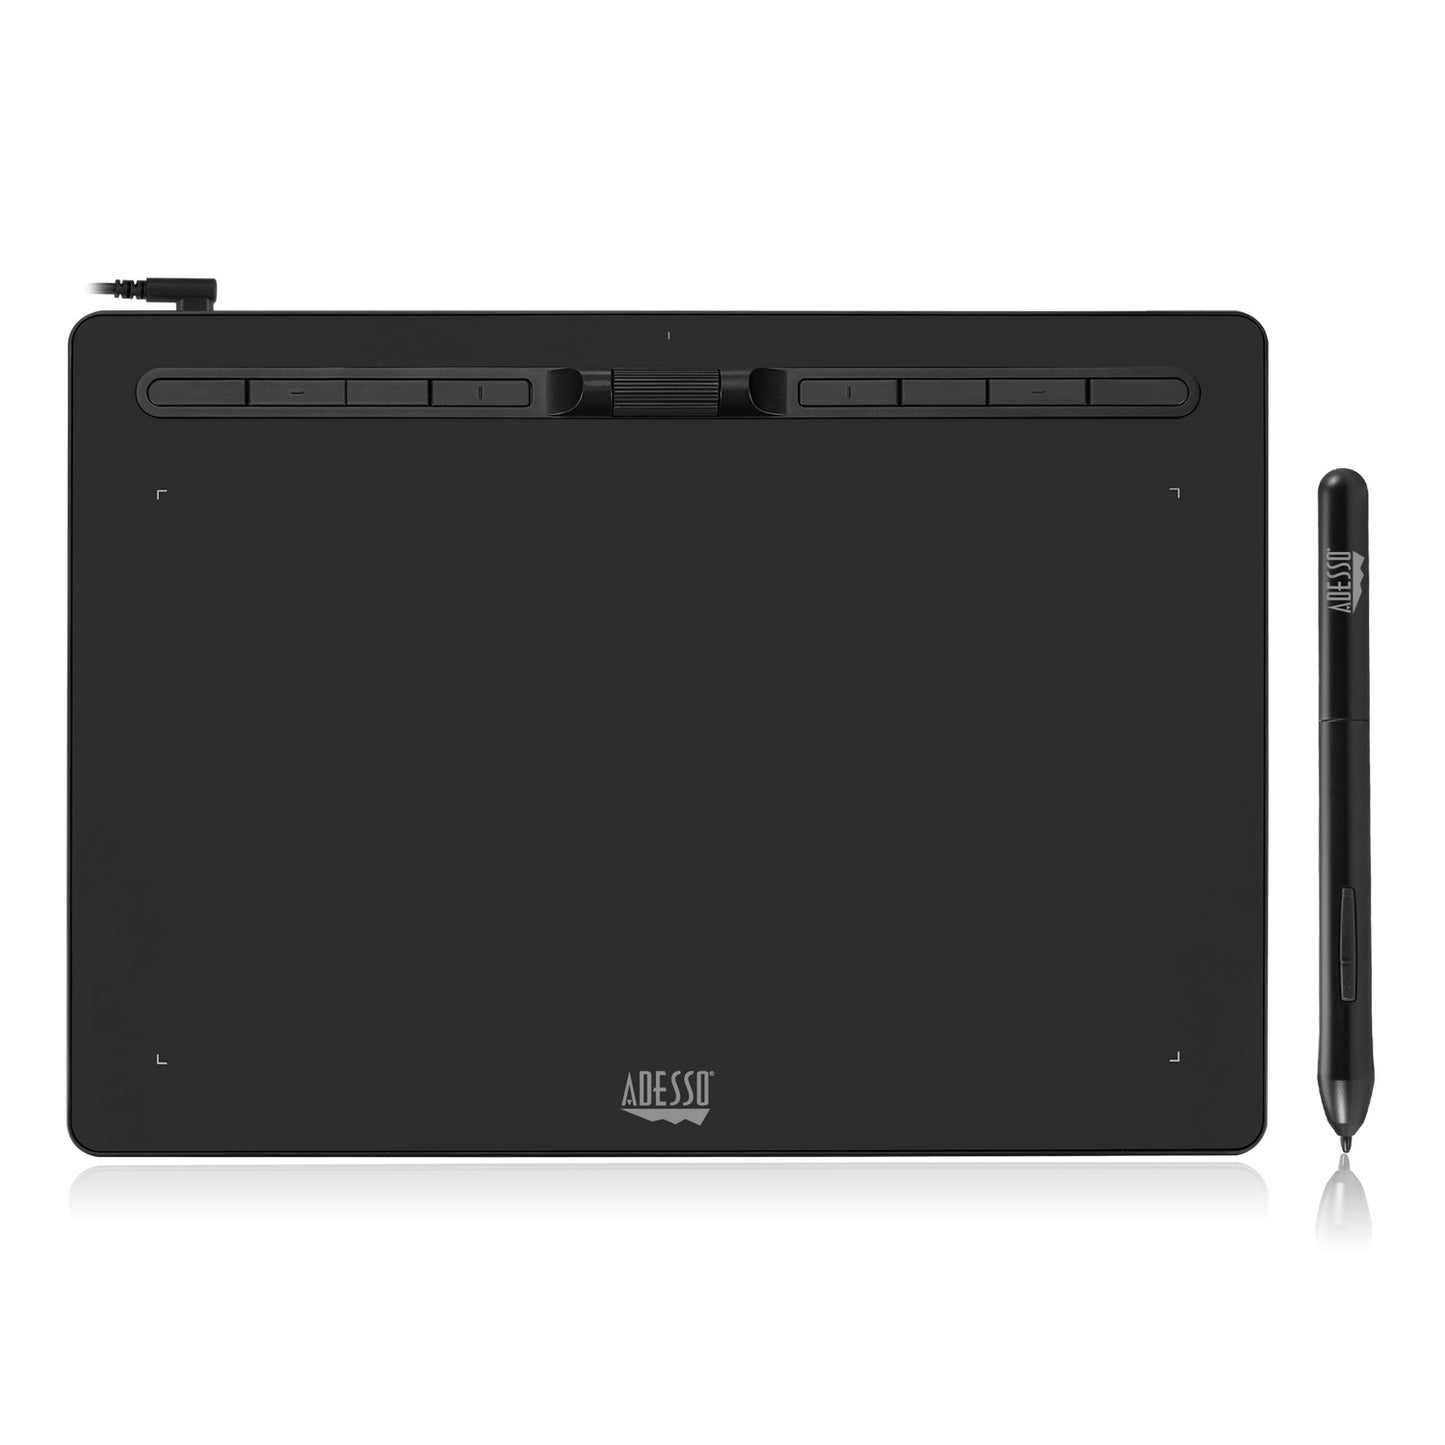 Adesso Cybertablet K12 12" x 7" Graphic Tablet